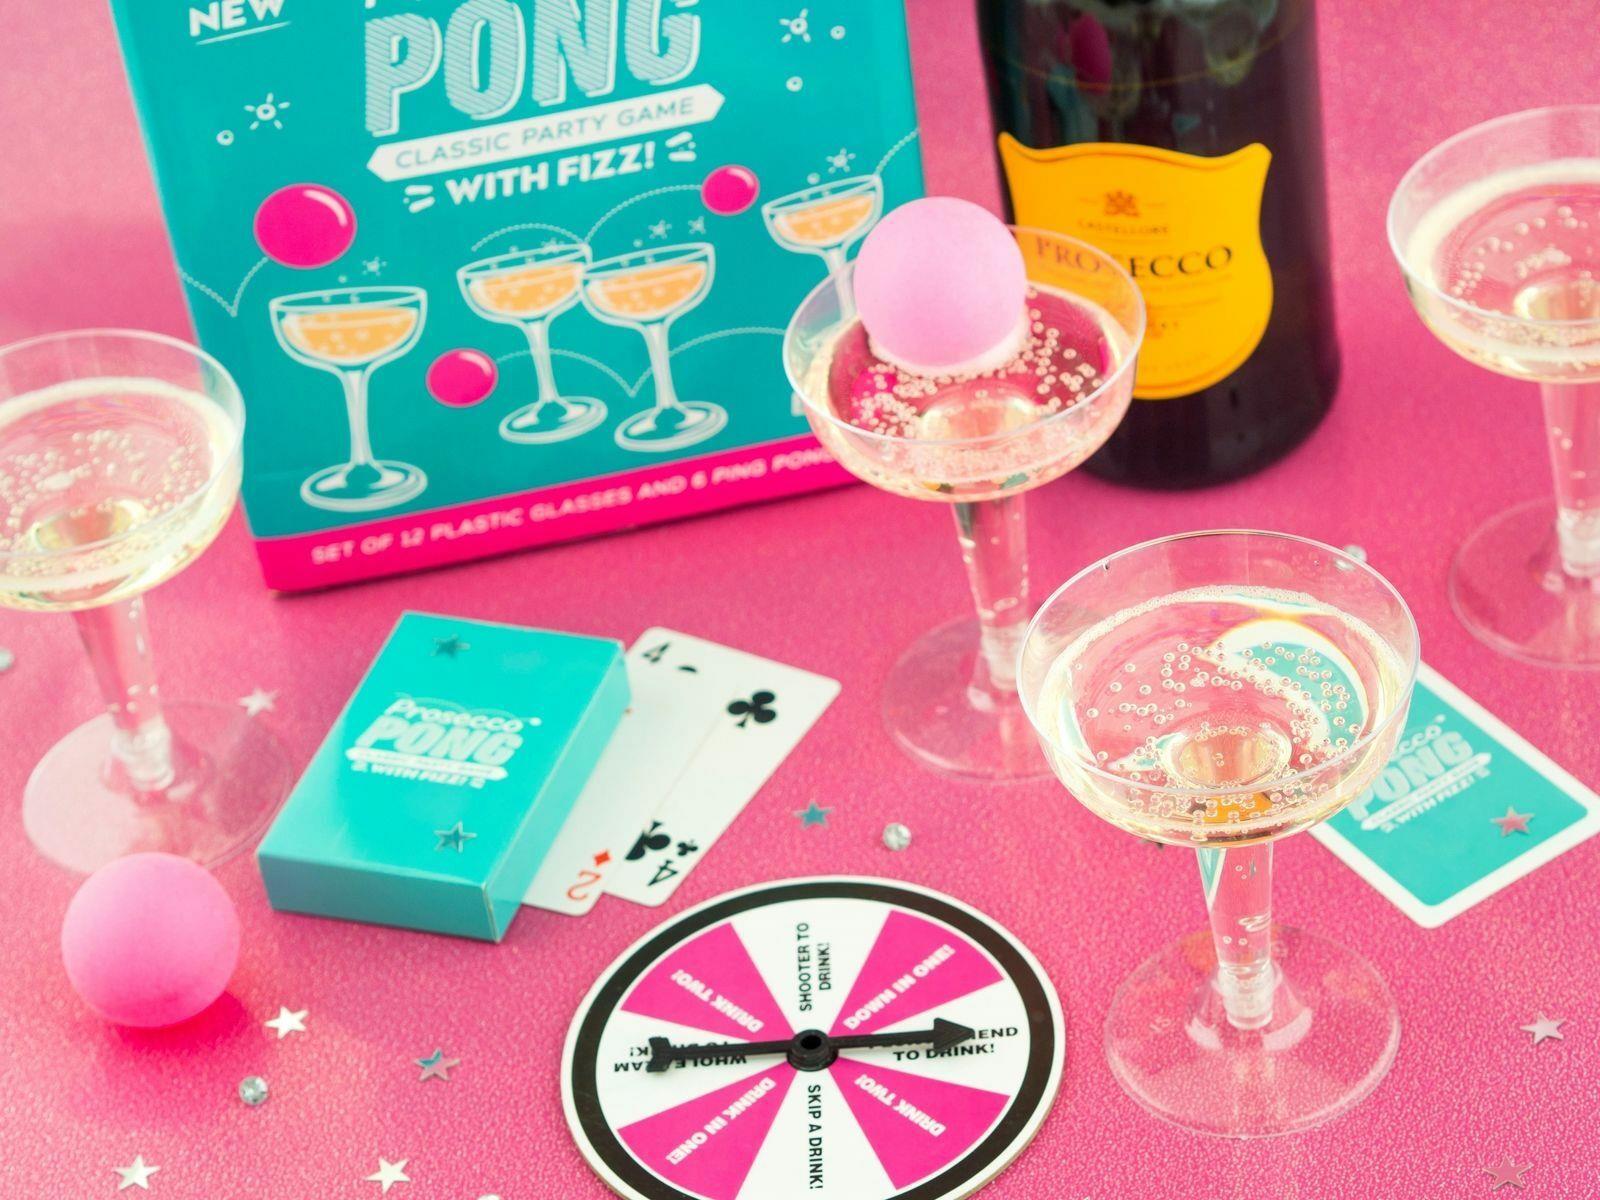 Prosecco Adult Fun Drinking Game 12 Glasses Activity Party Pong Game Xmas T 2950